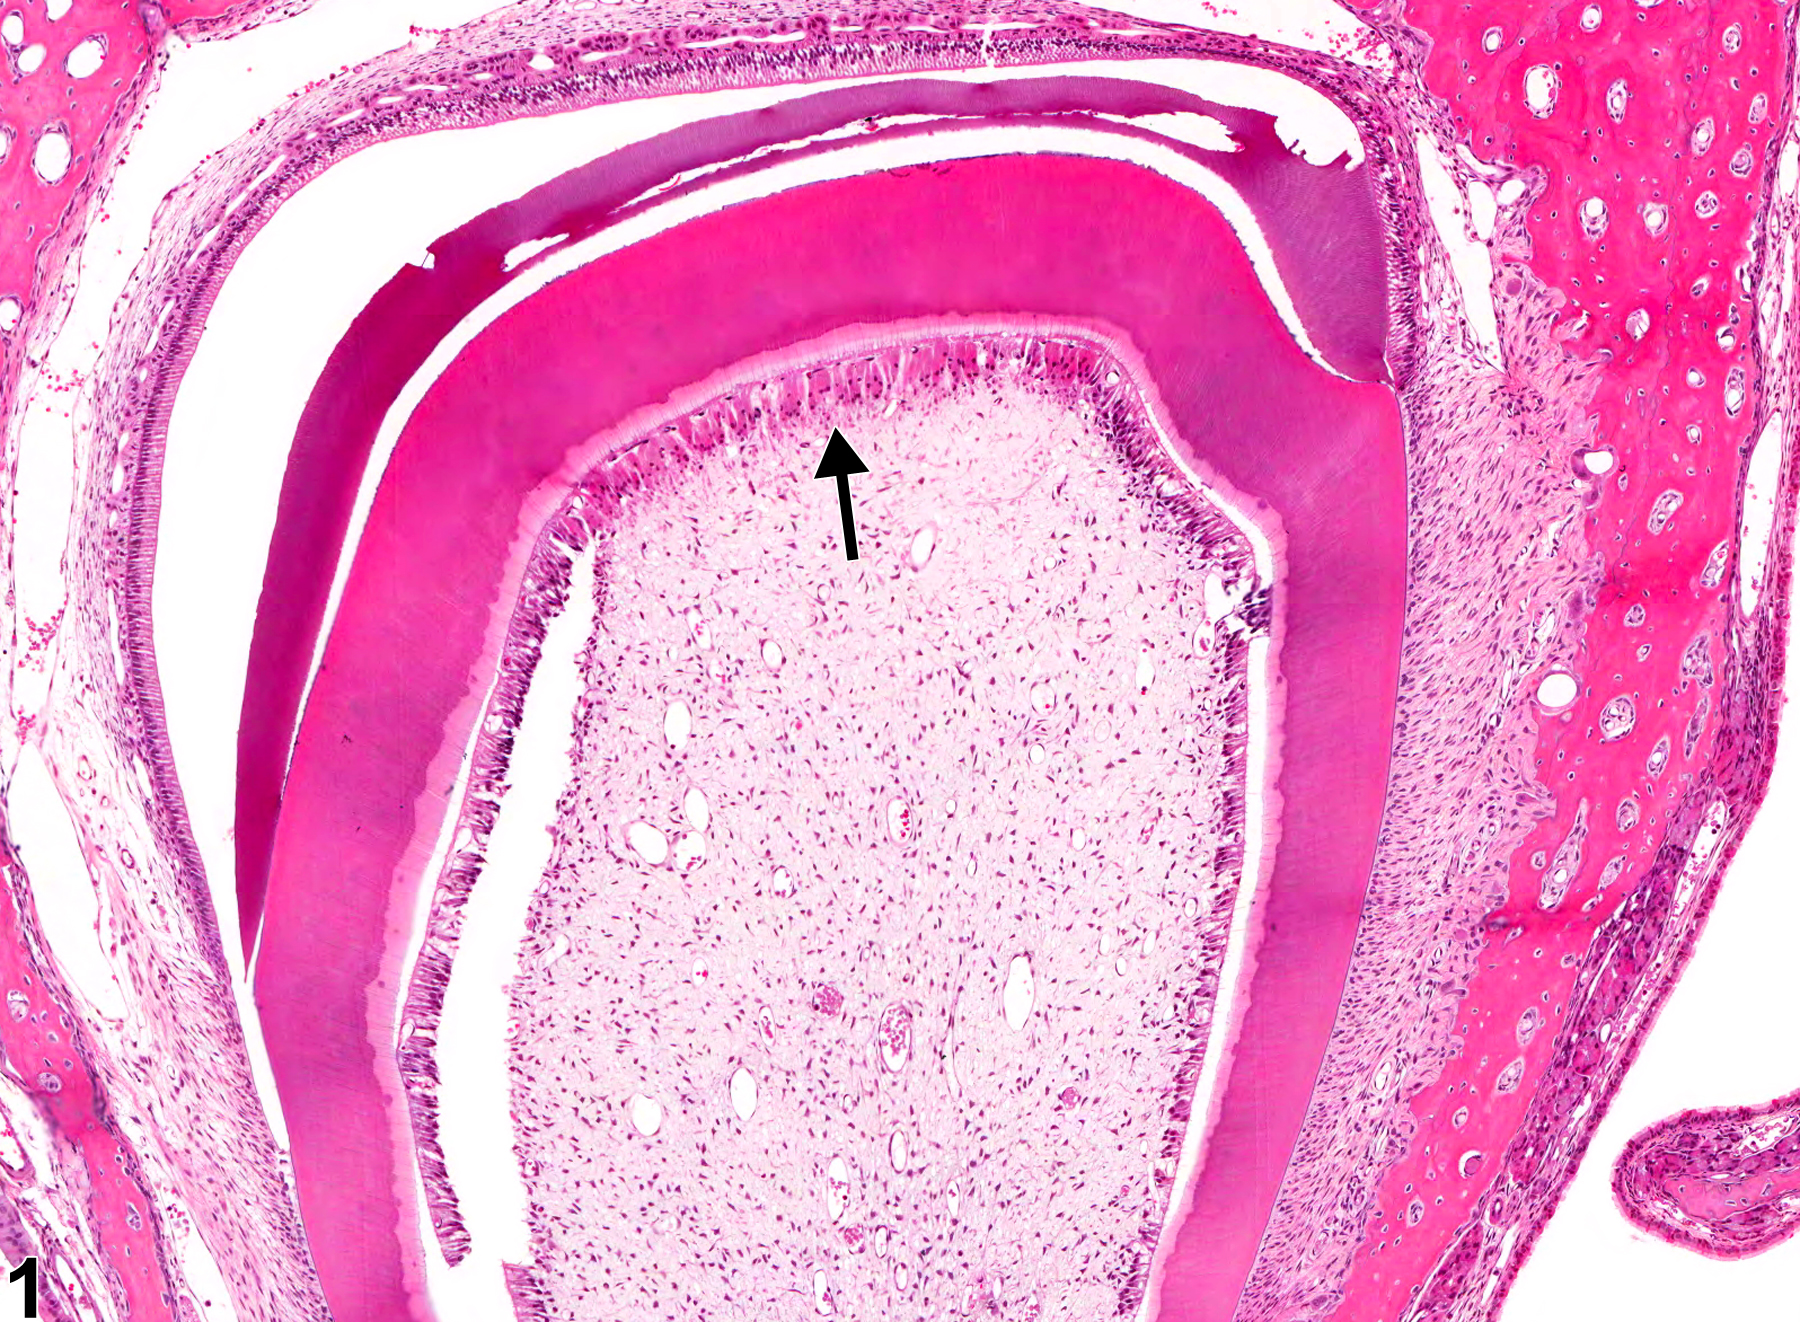 Image of necrosis in the tooth from a female F344/N rat in a subchronic study